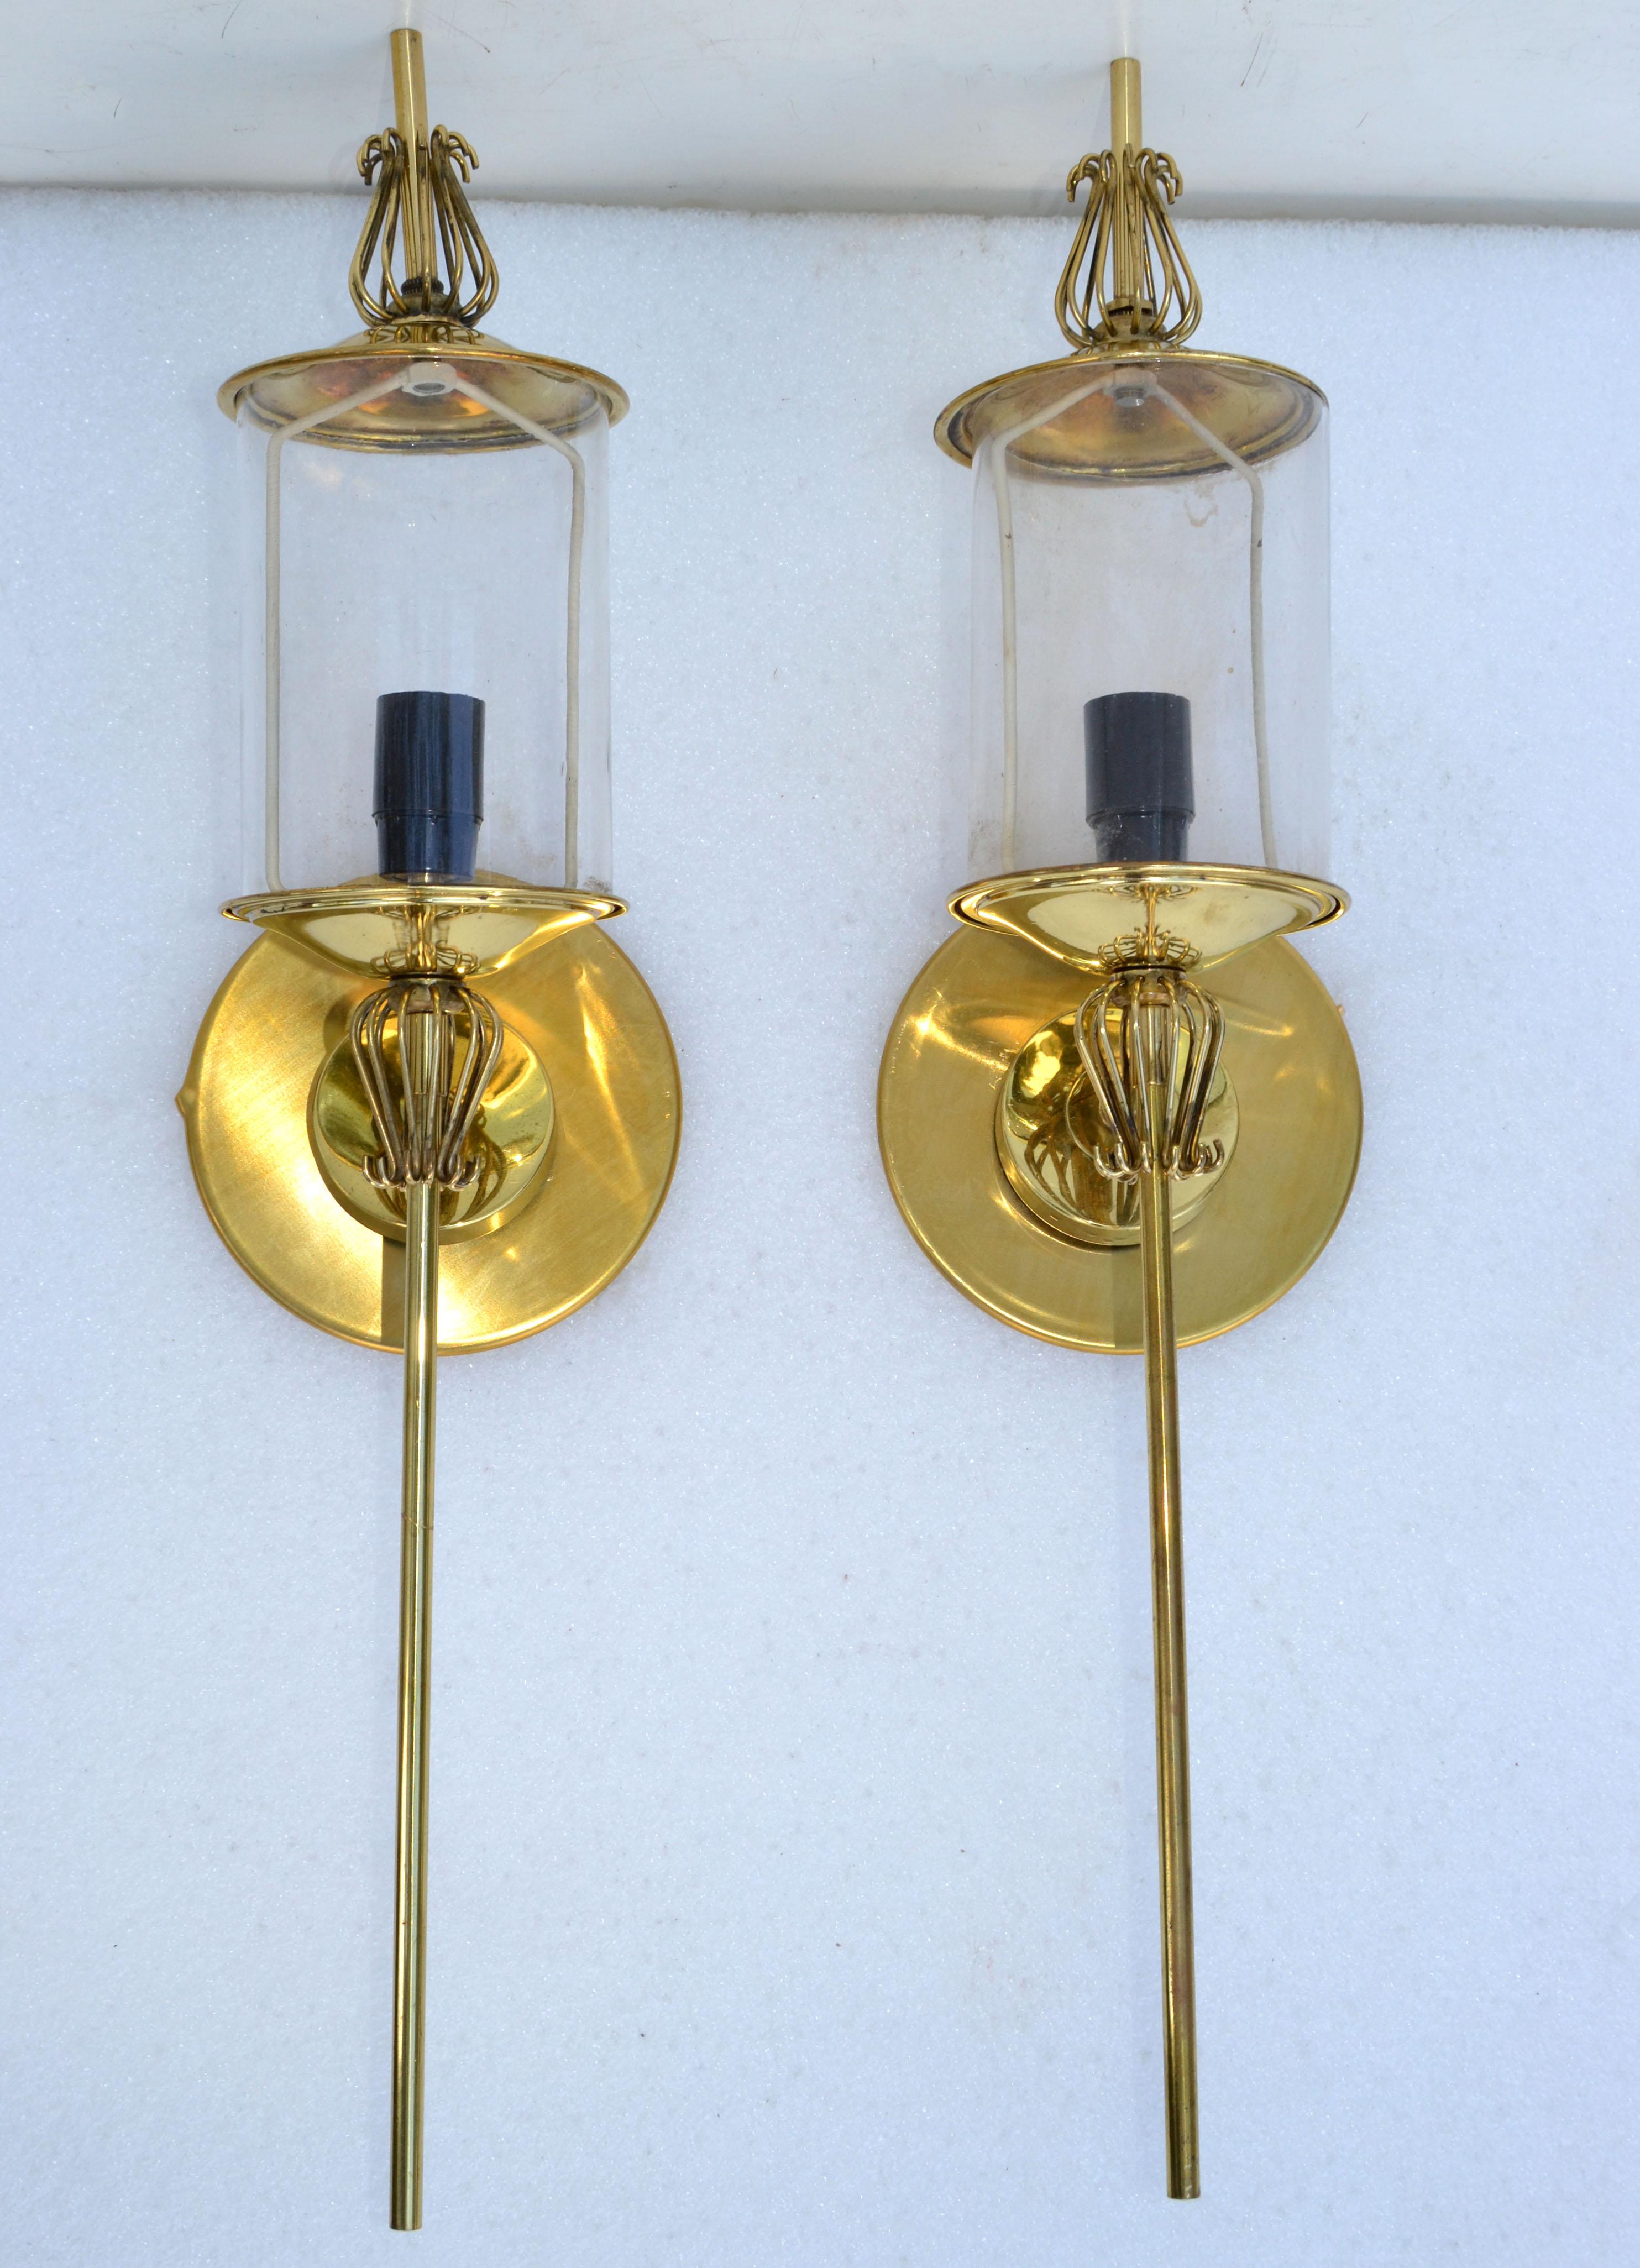 Pair of Maison Lunel Brass & Glass Sconces, Wall Lamp French Mid-Century Modern For Sale 11